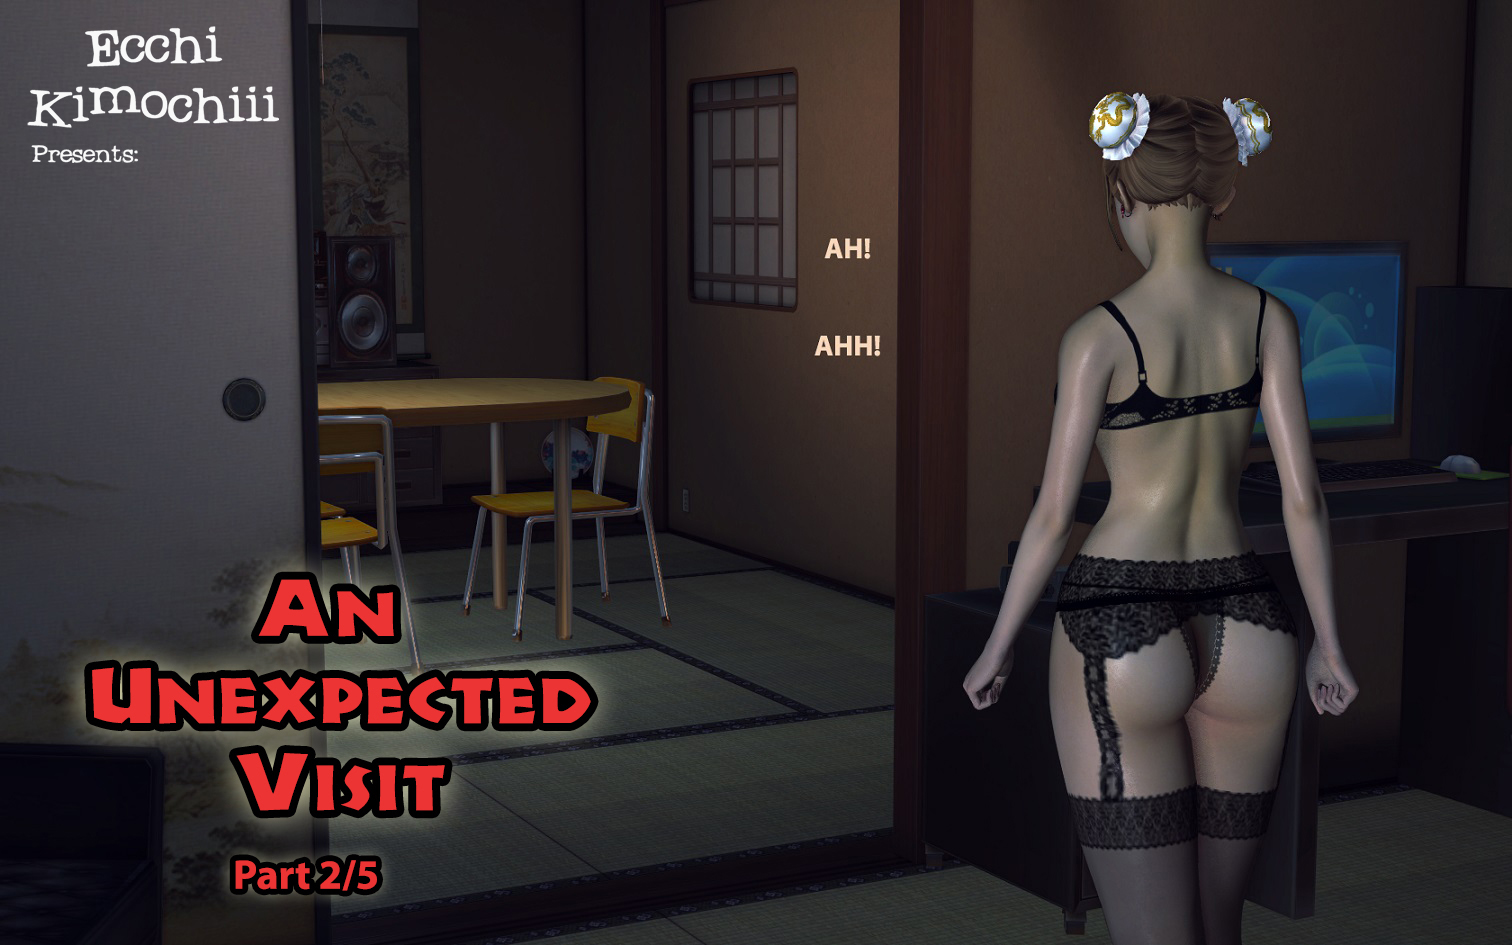 Free Download 3D Adult Comics An unexpected visit by Ecchi Kimochiii